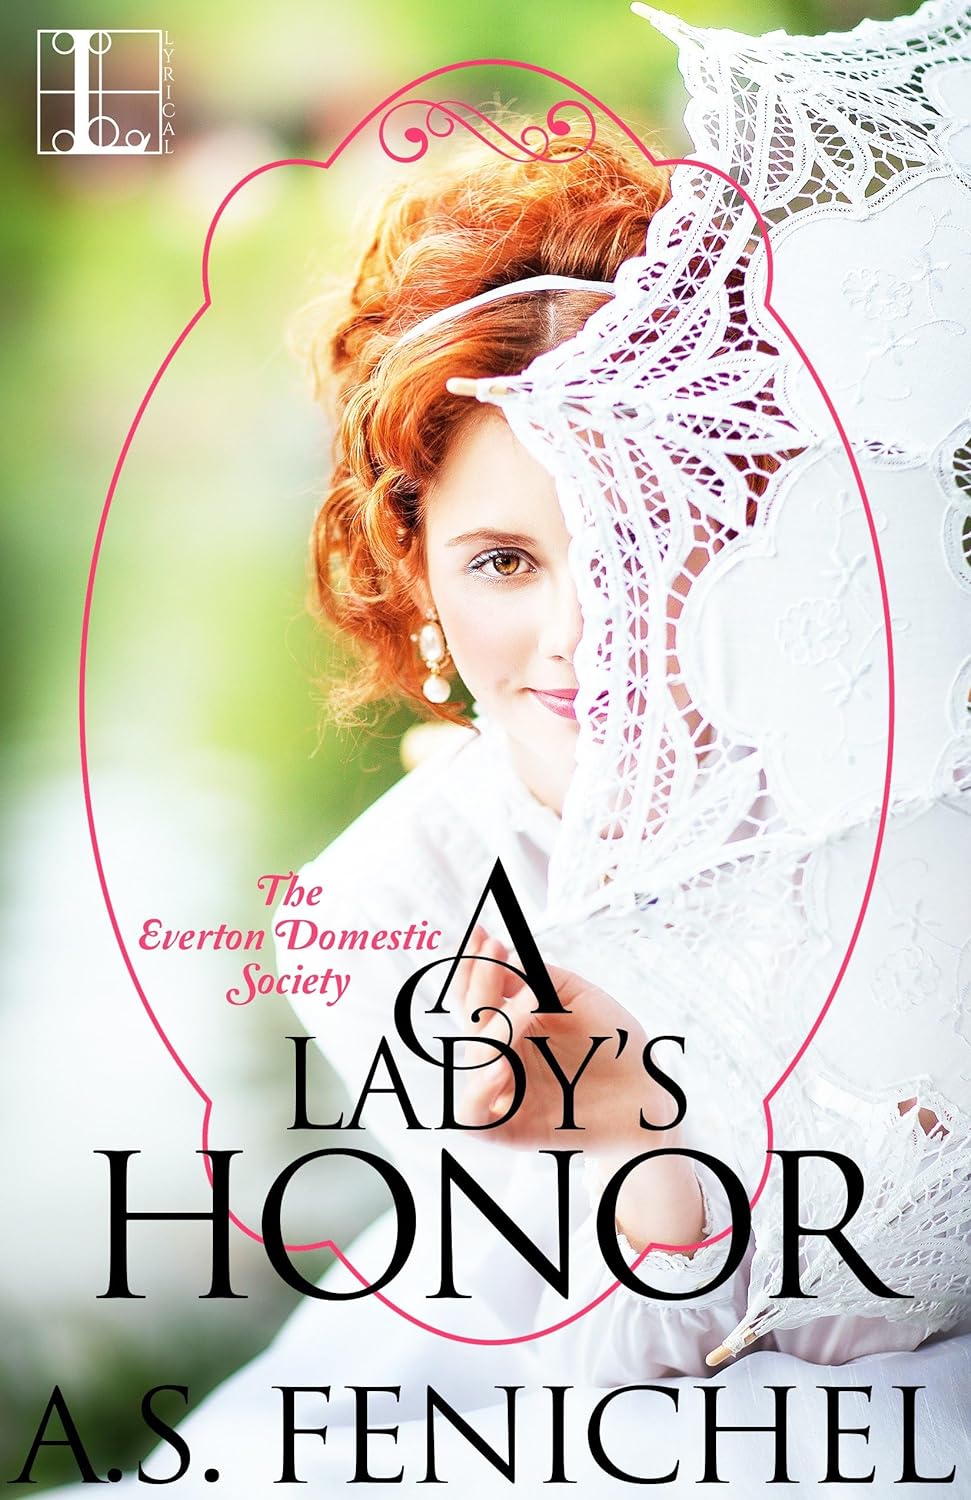 A Lady's Honor - A.S. Fenichel